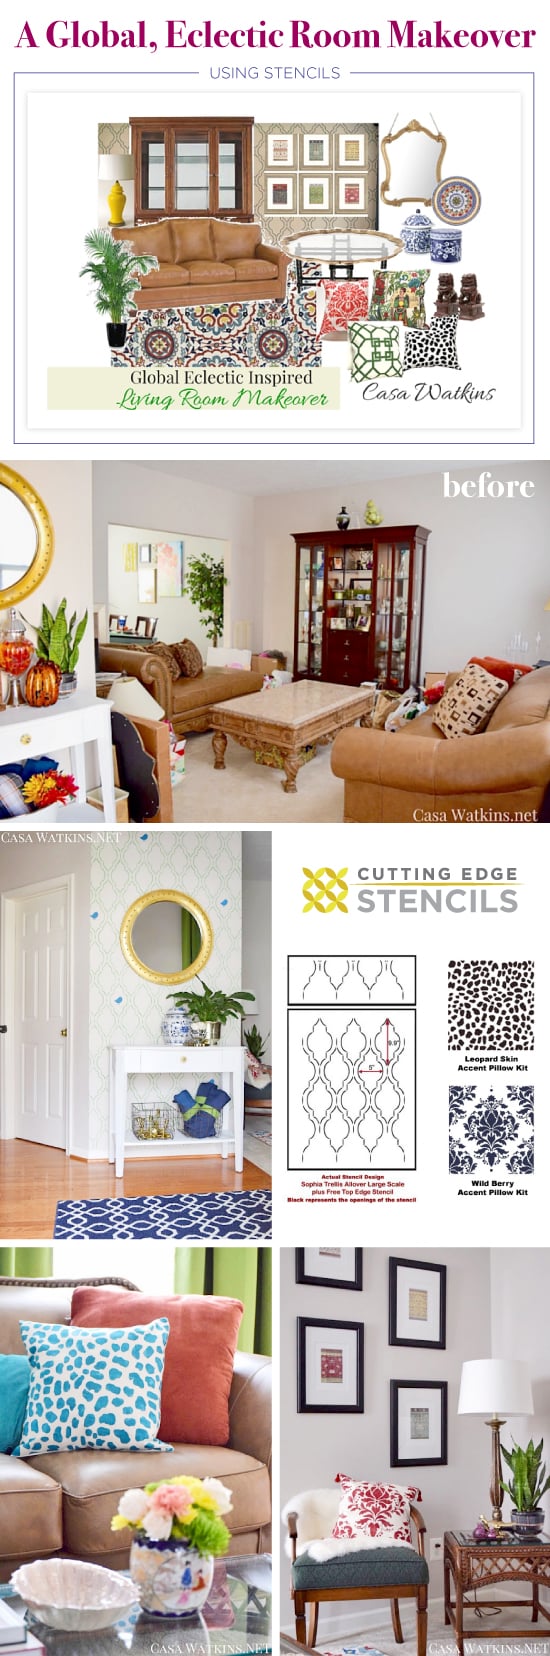 Cutting Edge Stencils shares a living room and entryway makeover that uses the Sophia Trellis and stenciled accent pillow kits for a global, eclectic style. http://www.cuttingedgestencils.com/sophia-trellis-stencil-geometric-wall-pattern.html